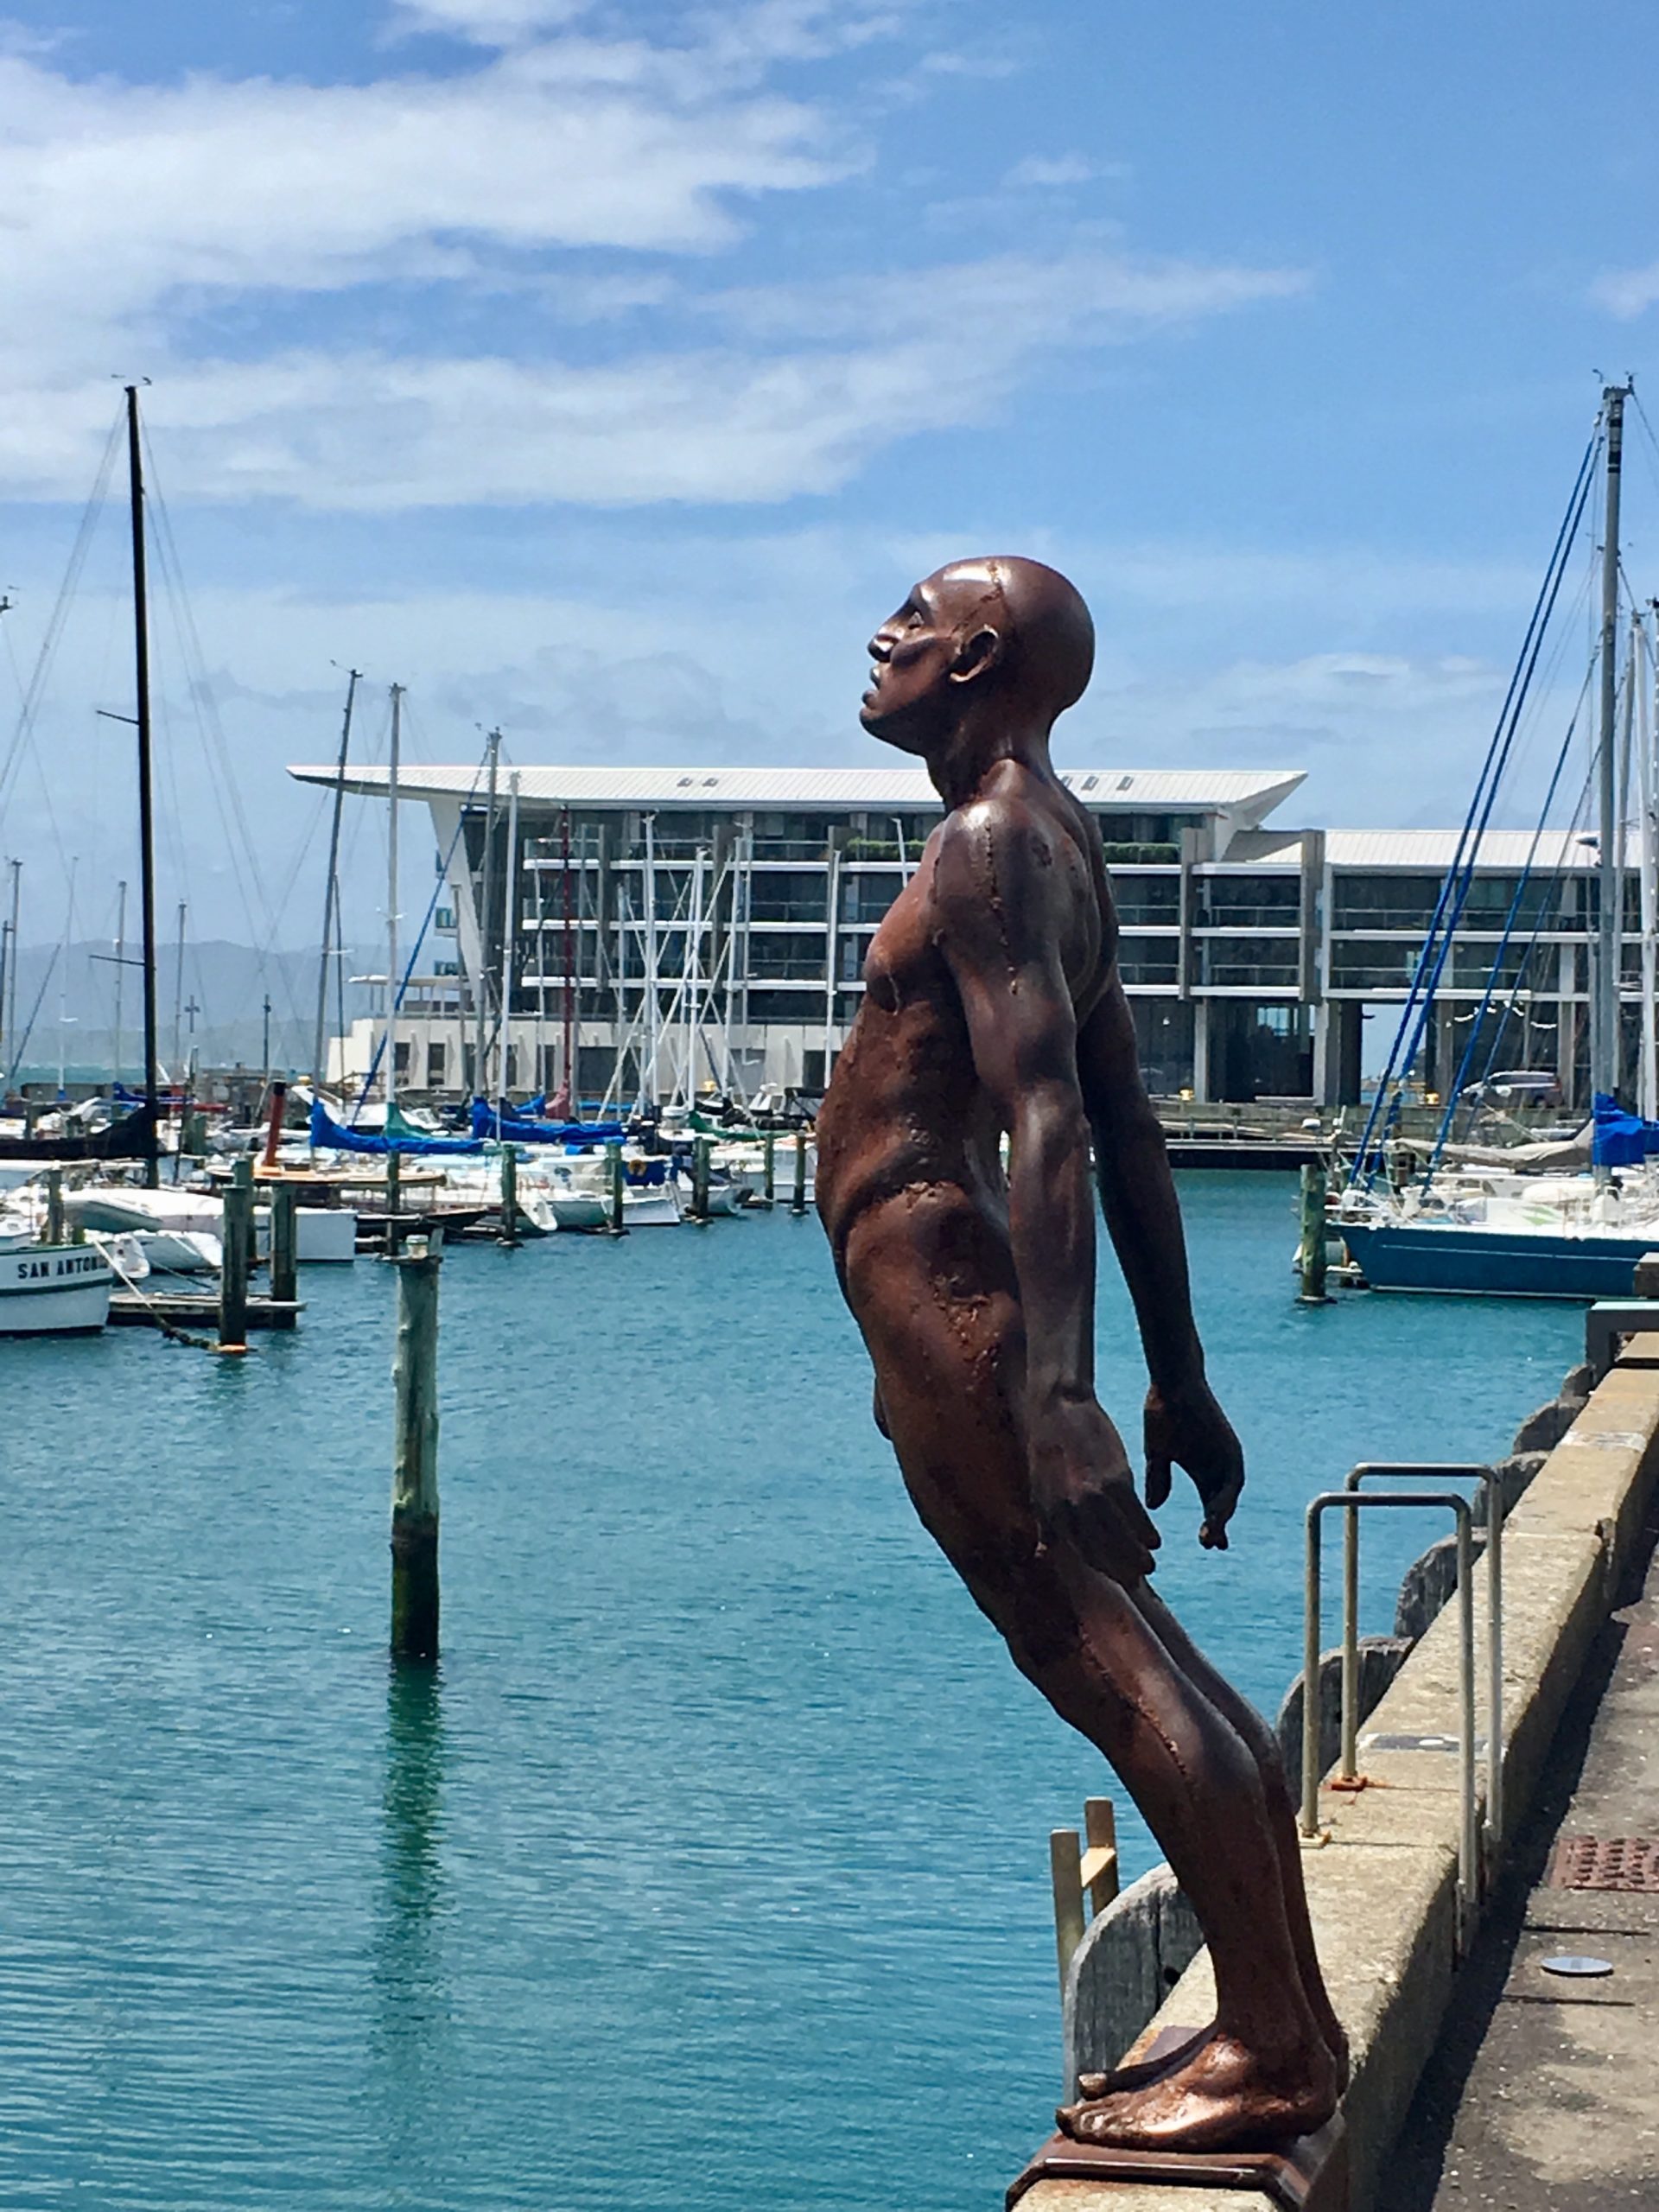 Sometimes fighting covid-19 feels a bit like this statue in Wellington Harbour: leaning into the wind and hoping you're not going to fall. Getting vaccinated is our only safety net right now.